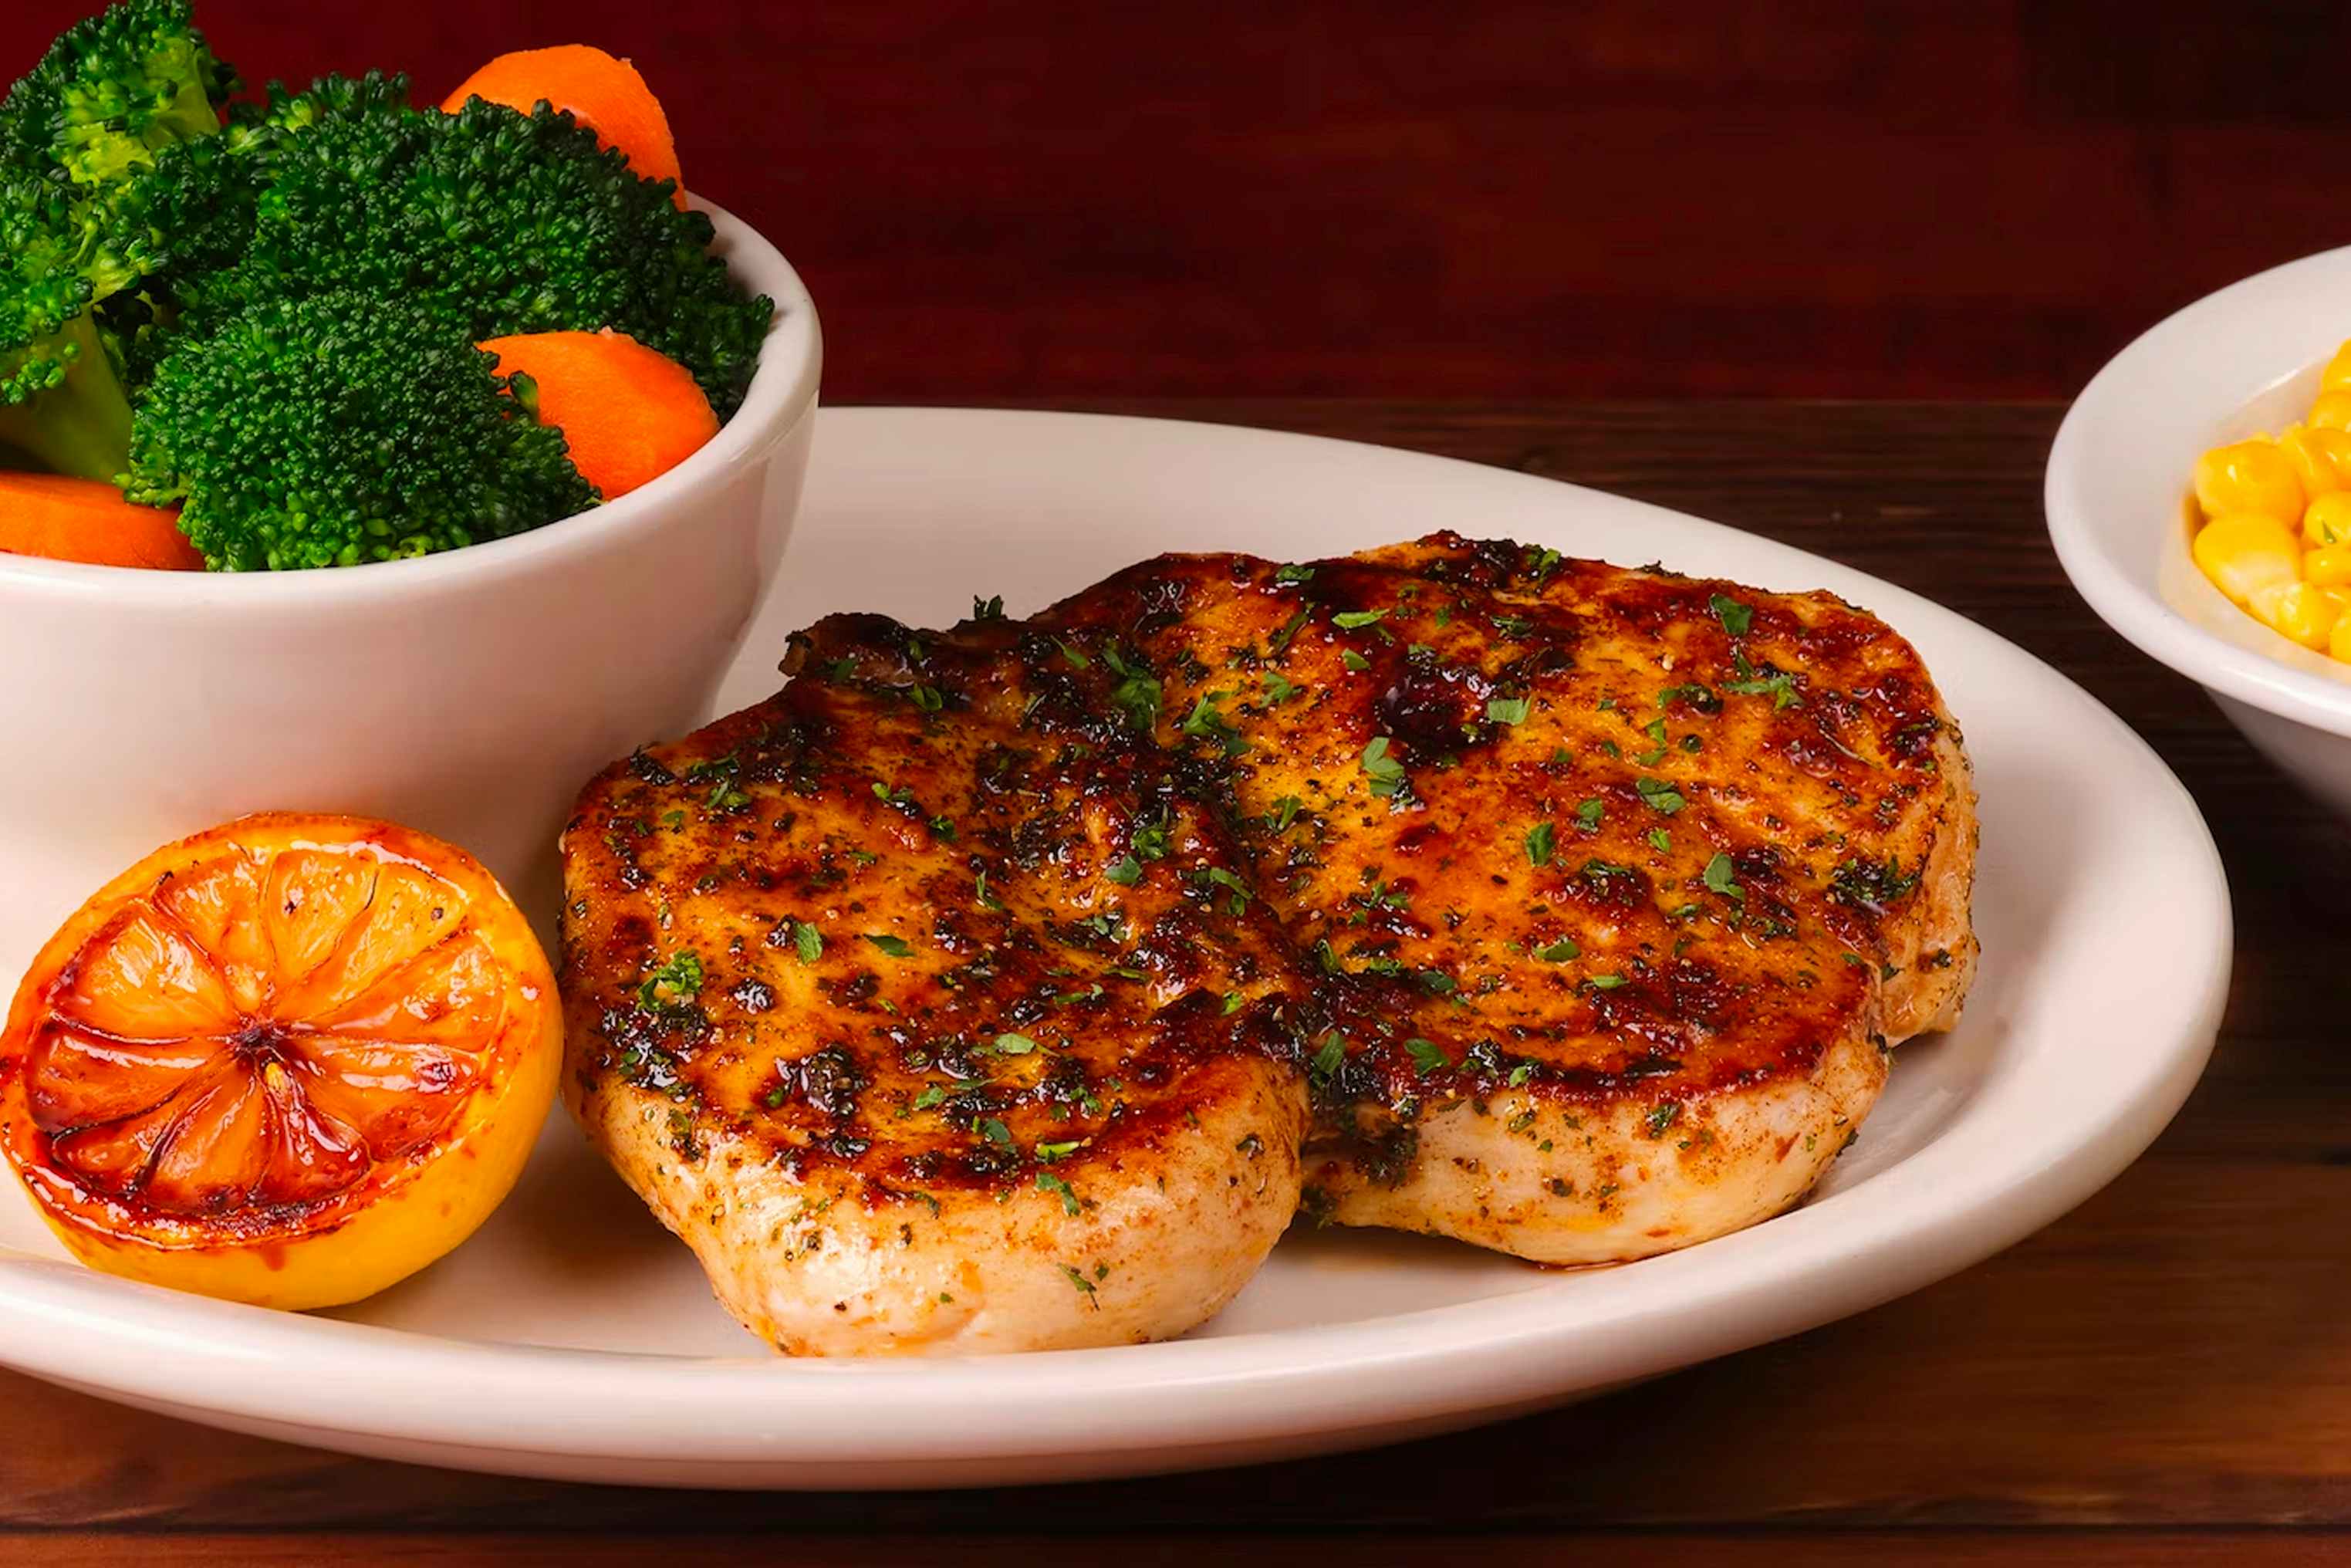 Herb crusted Chicken from Texas Roadhouse